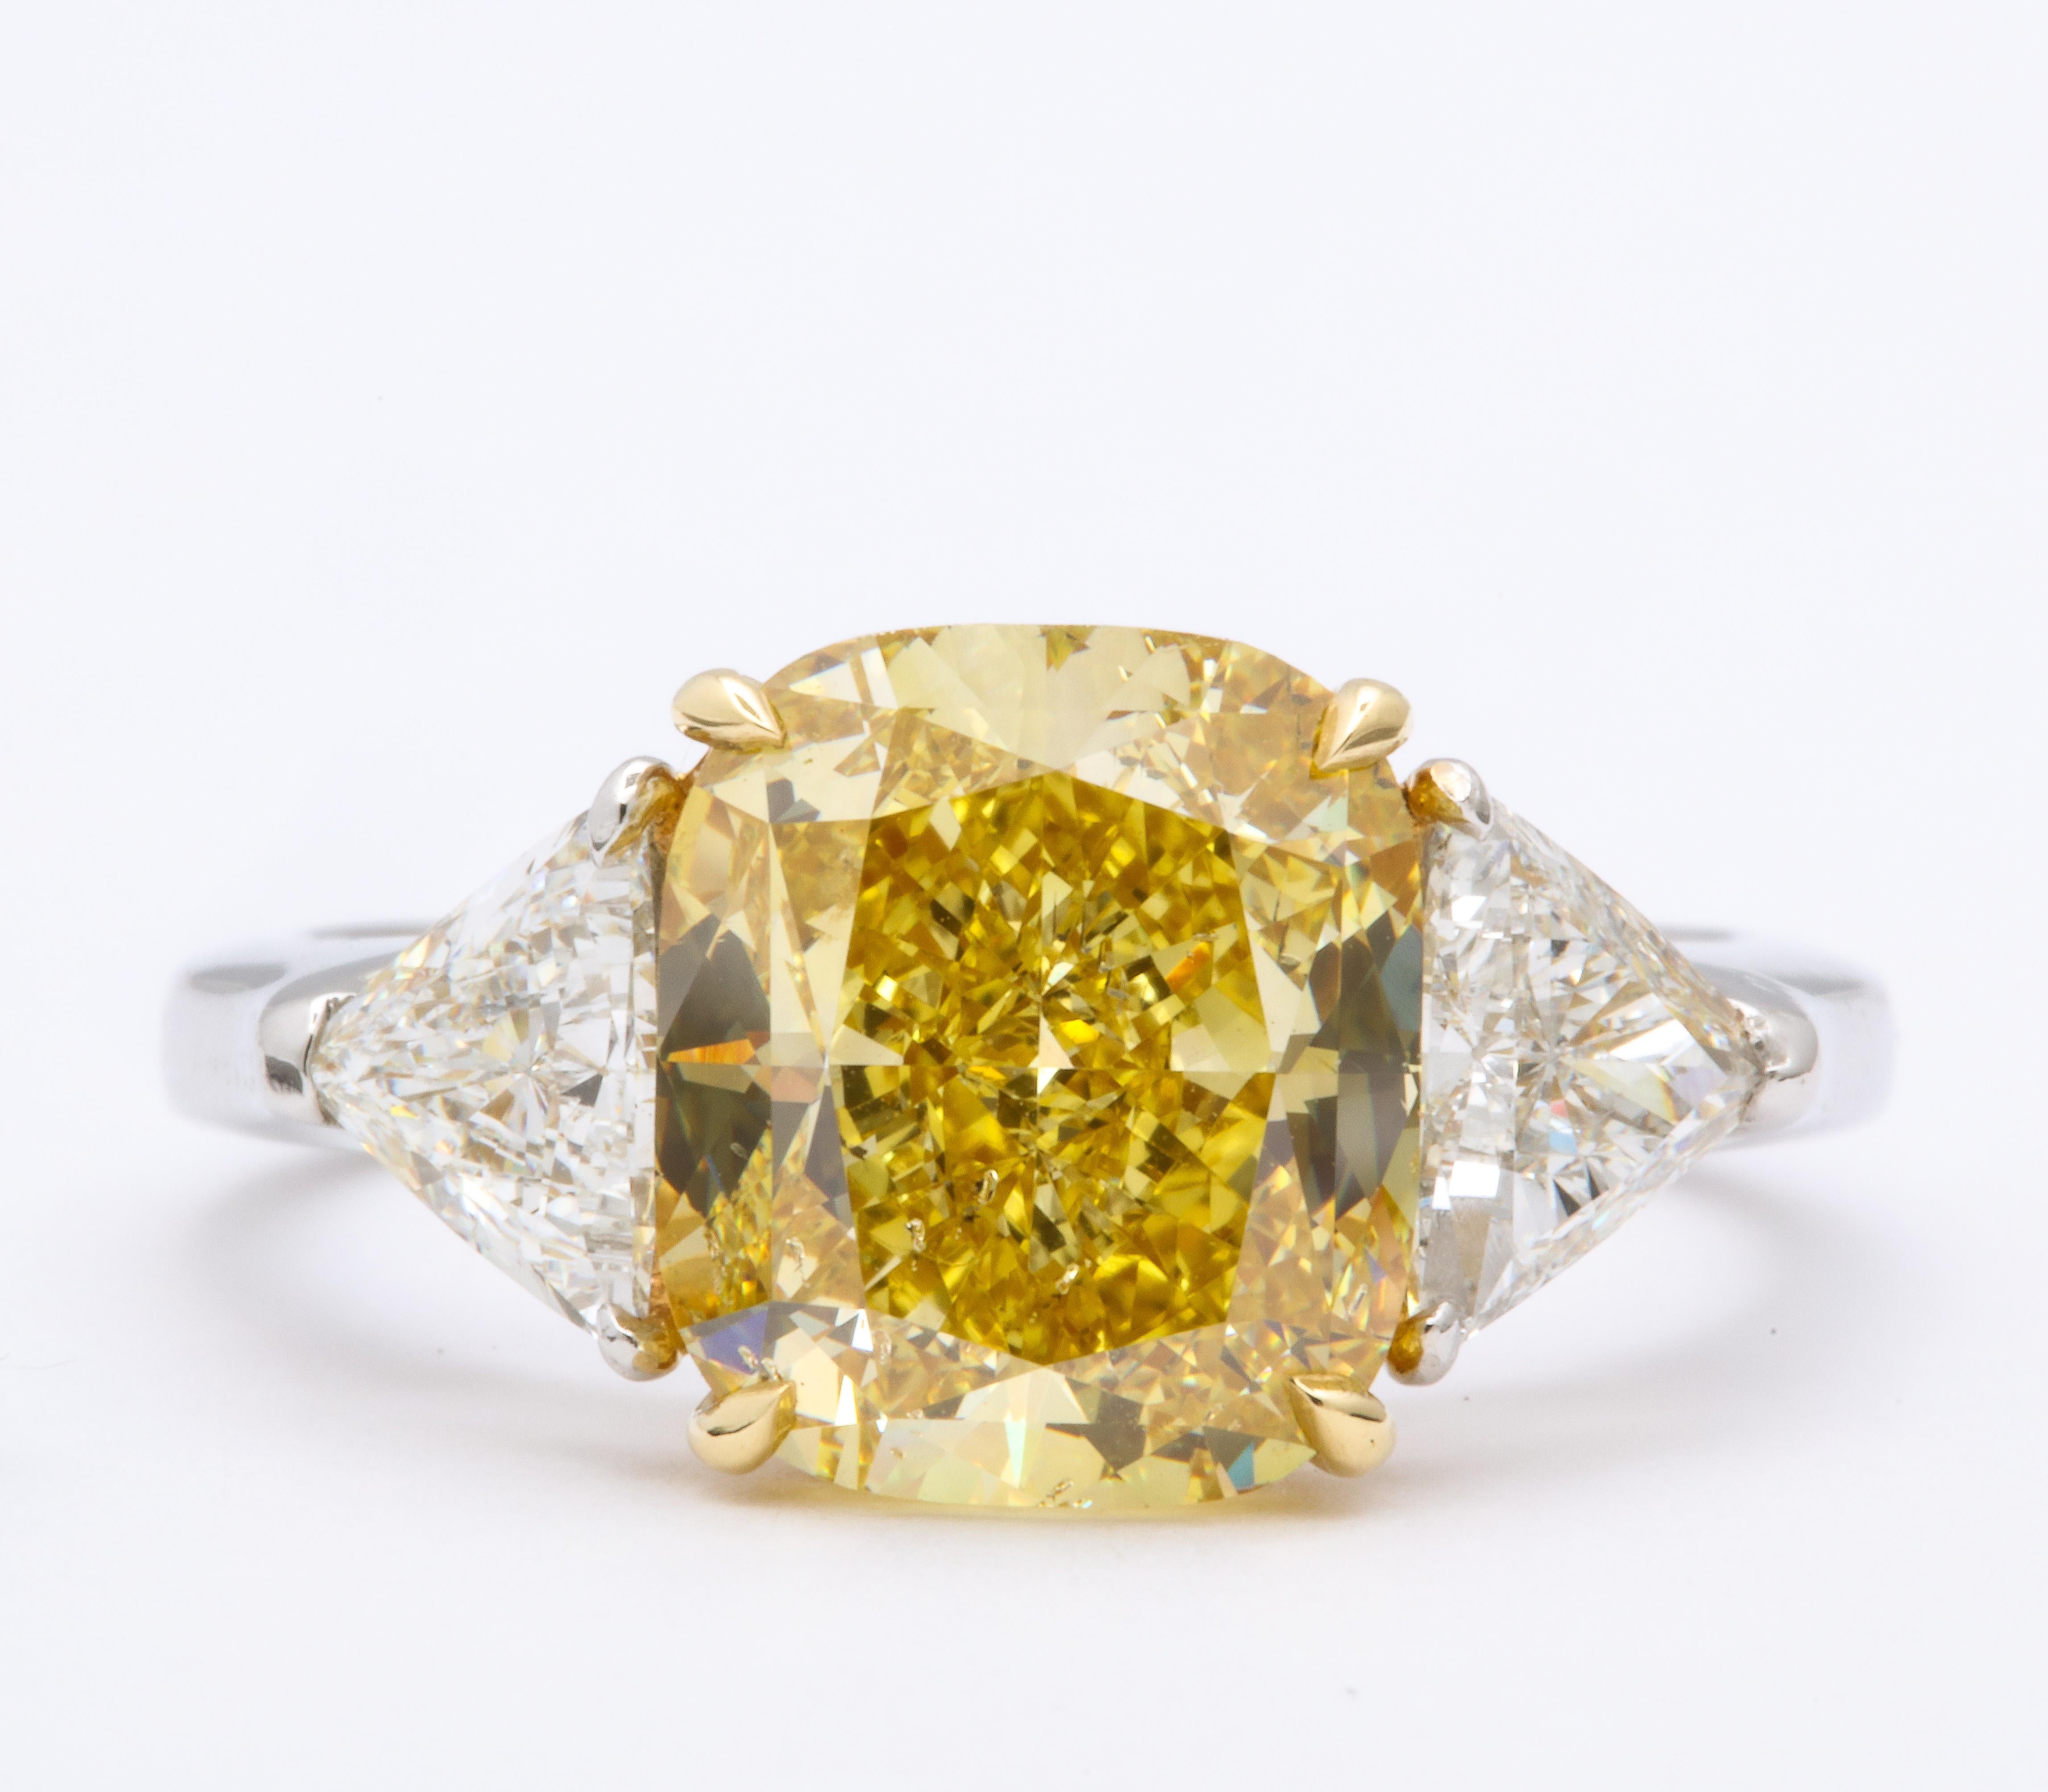 
Stunning cushion cut 4.30 carat GIA certified Fancy Intense Yellow diamond, SI2. 

Set with 1.10 carats of white trillion cut side diamonds. 

Platinum and 18k yellow

Currently a size 6, this ring can easily be sized. 

Pictures do not do this